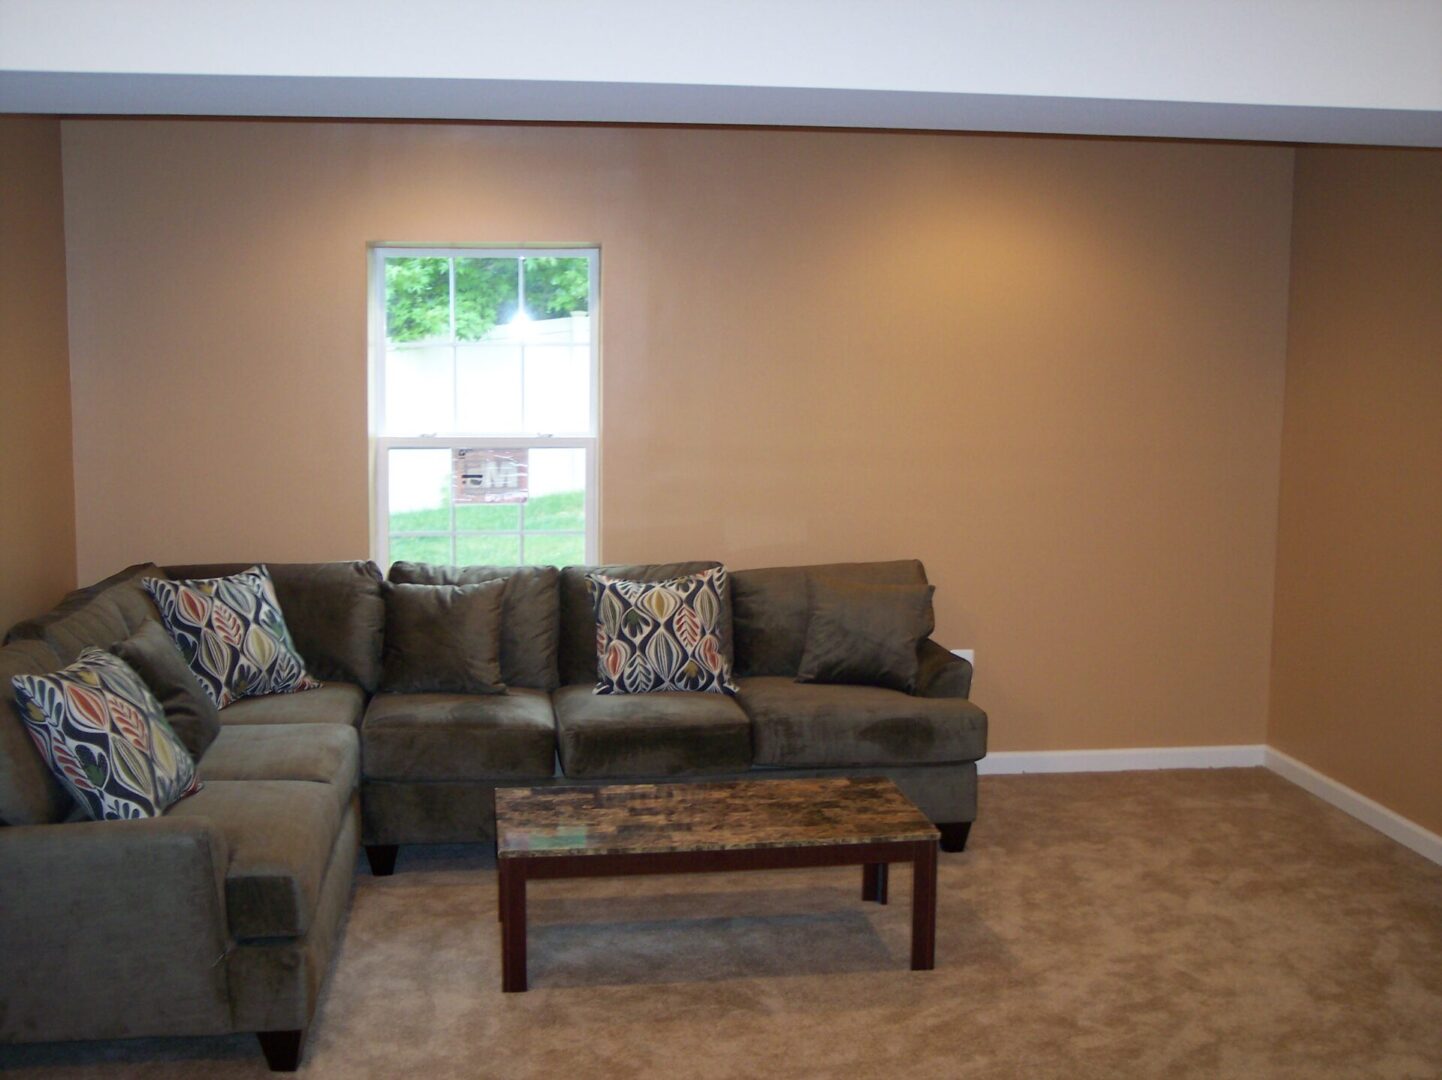 An indoor space with brown couches and coffee table